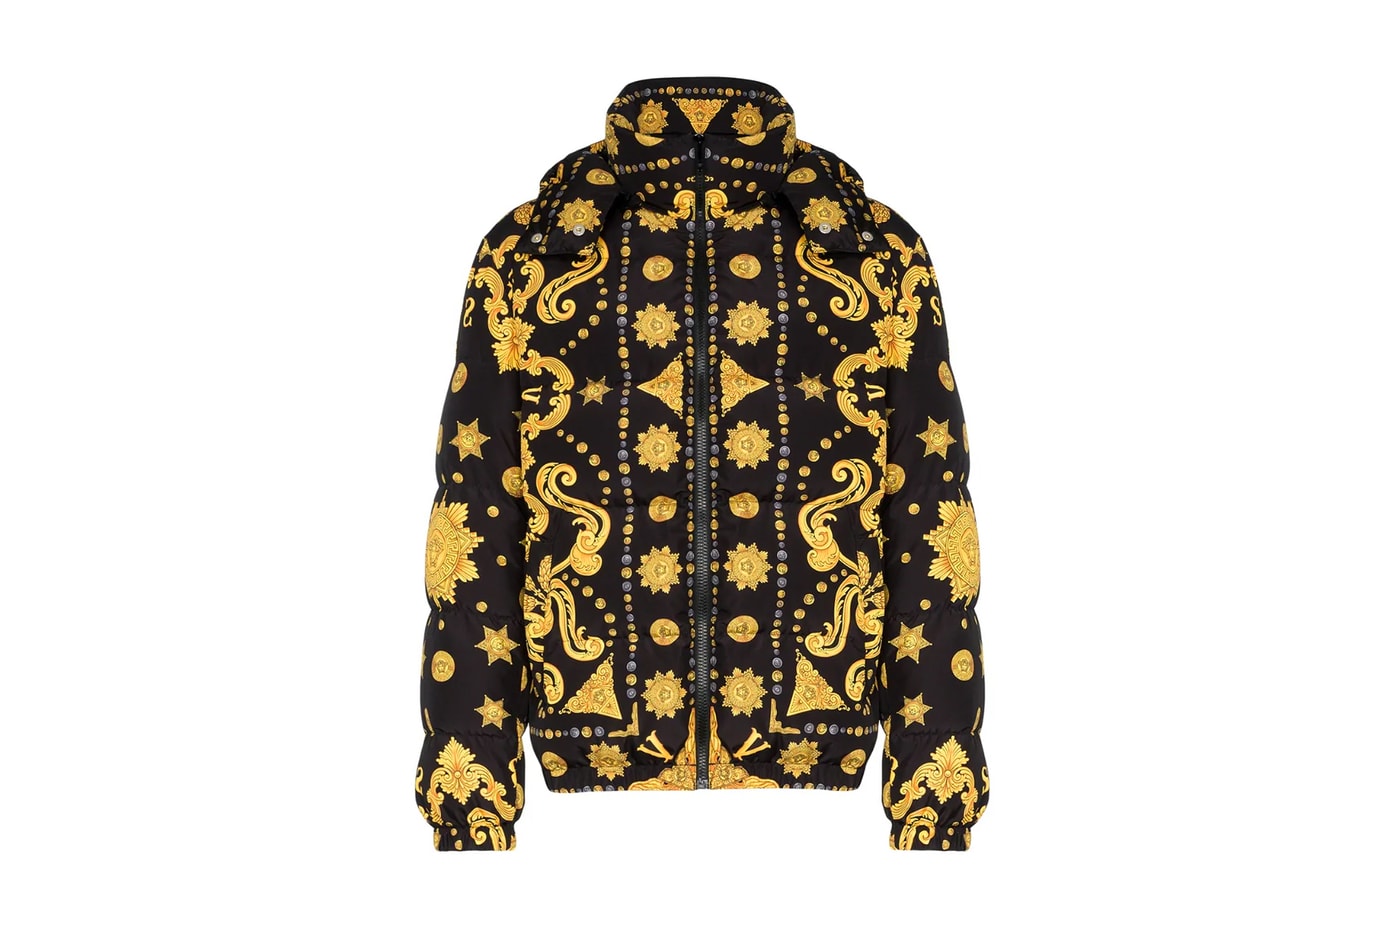 Versace Baroque-Print Puffer Jacket Release Jackets Browns Fashion BROWNS Italian Outerwear 